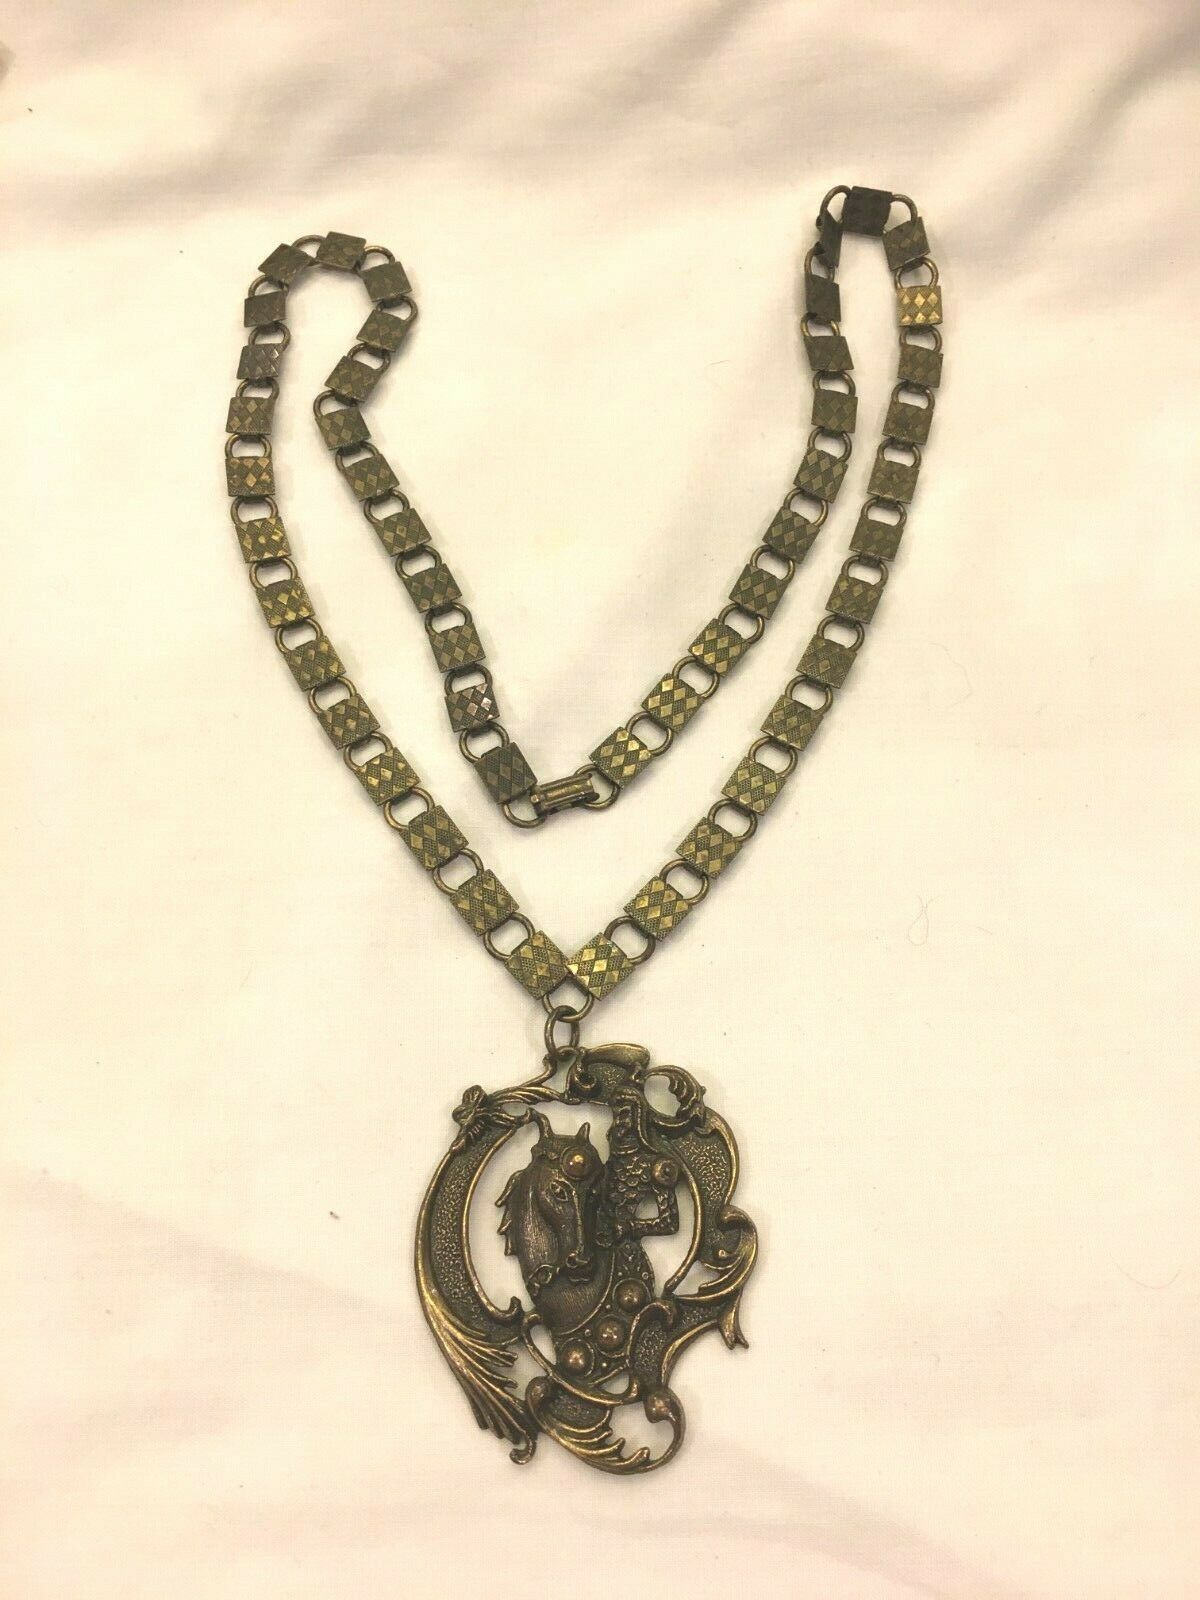 Medieval Style Necklace & Pendant